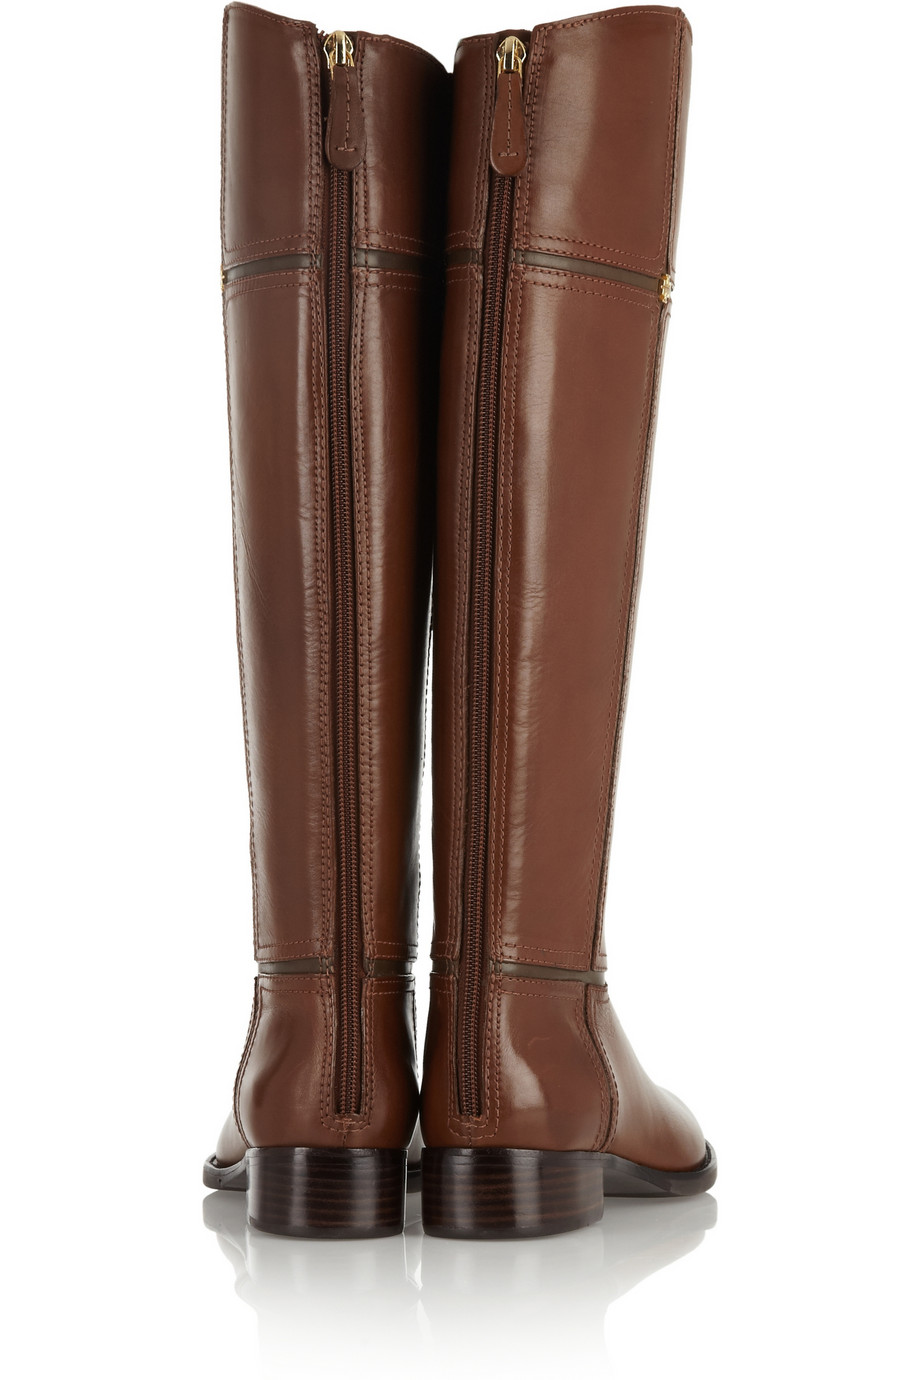 Tory Burch Juliet Leather Riding Boots in Brown - Lyst